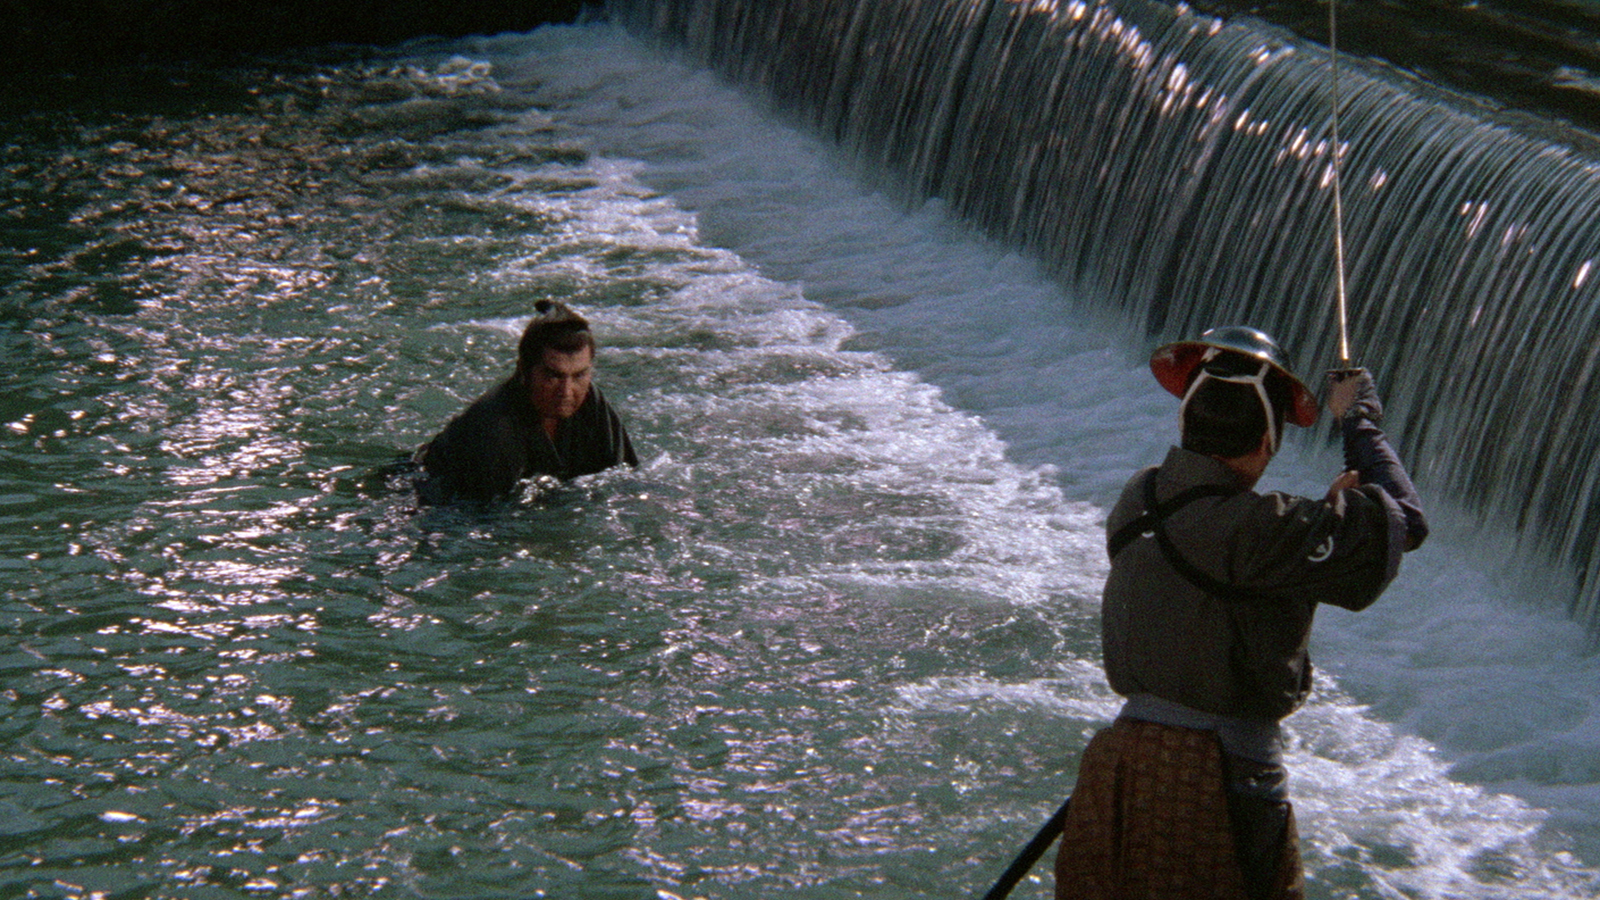 Screening of “Lone Wolf and Cub: Sword of Vengeance”